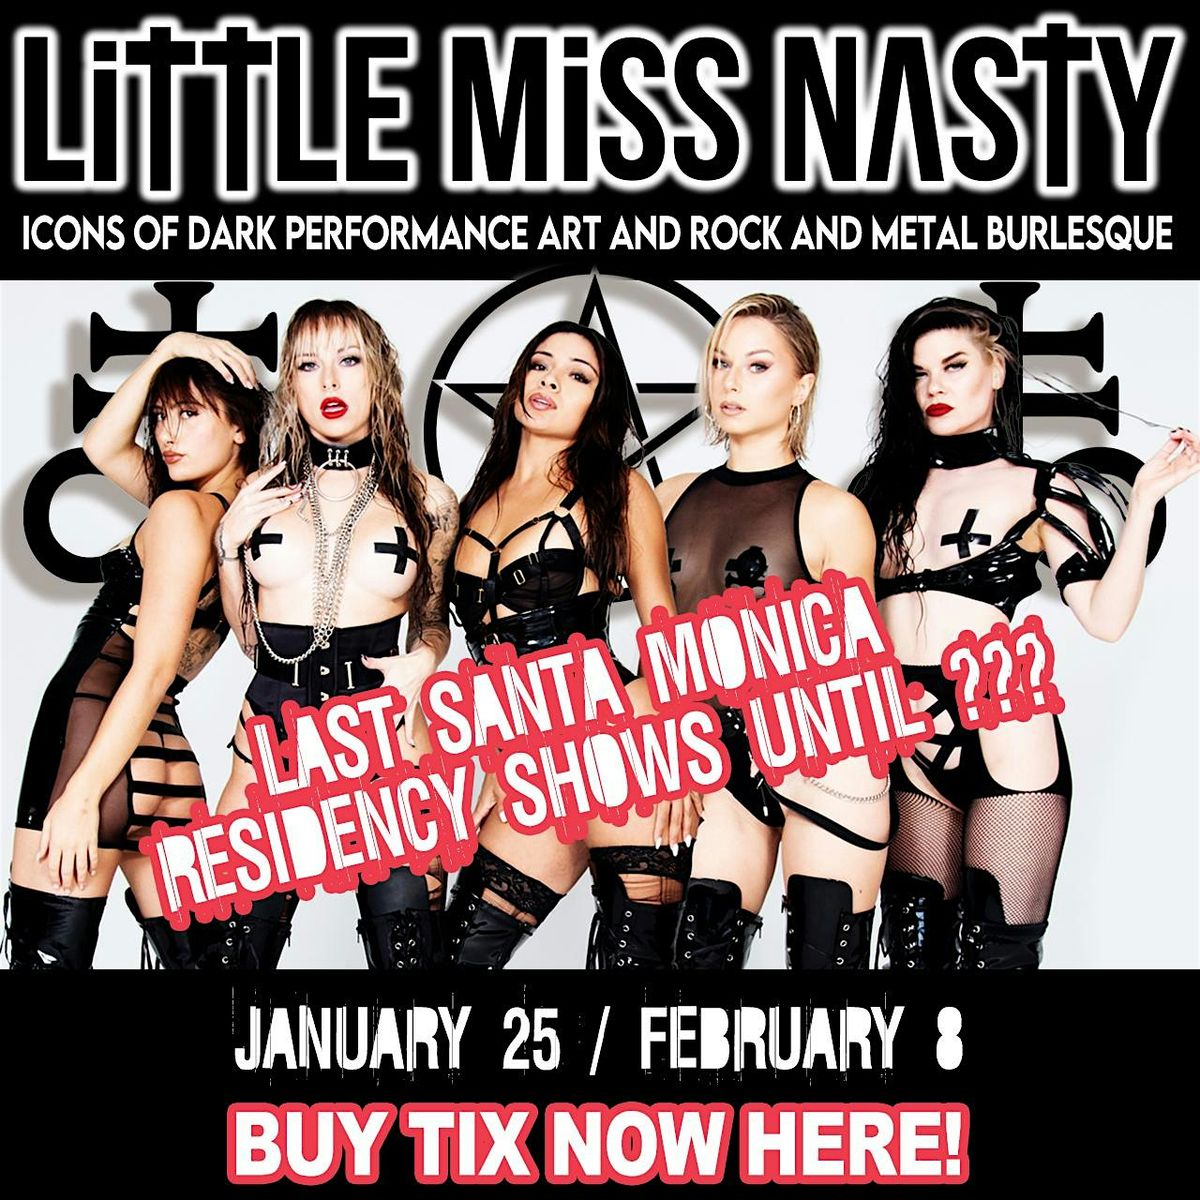 LITTLE MISS NASTY - ICONS OF ROCK AND METAL BURLESQUE